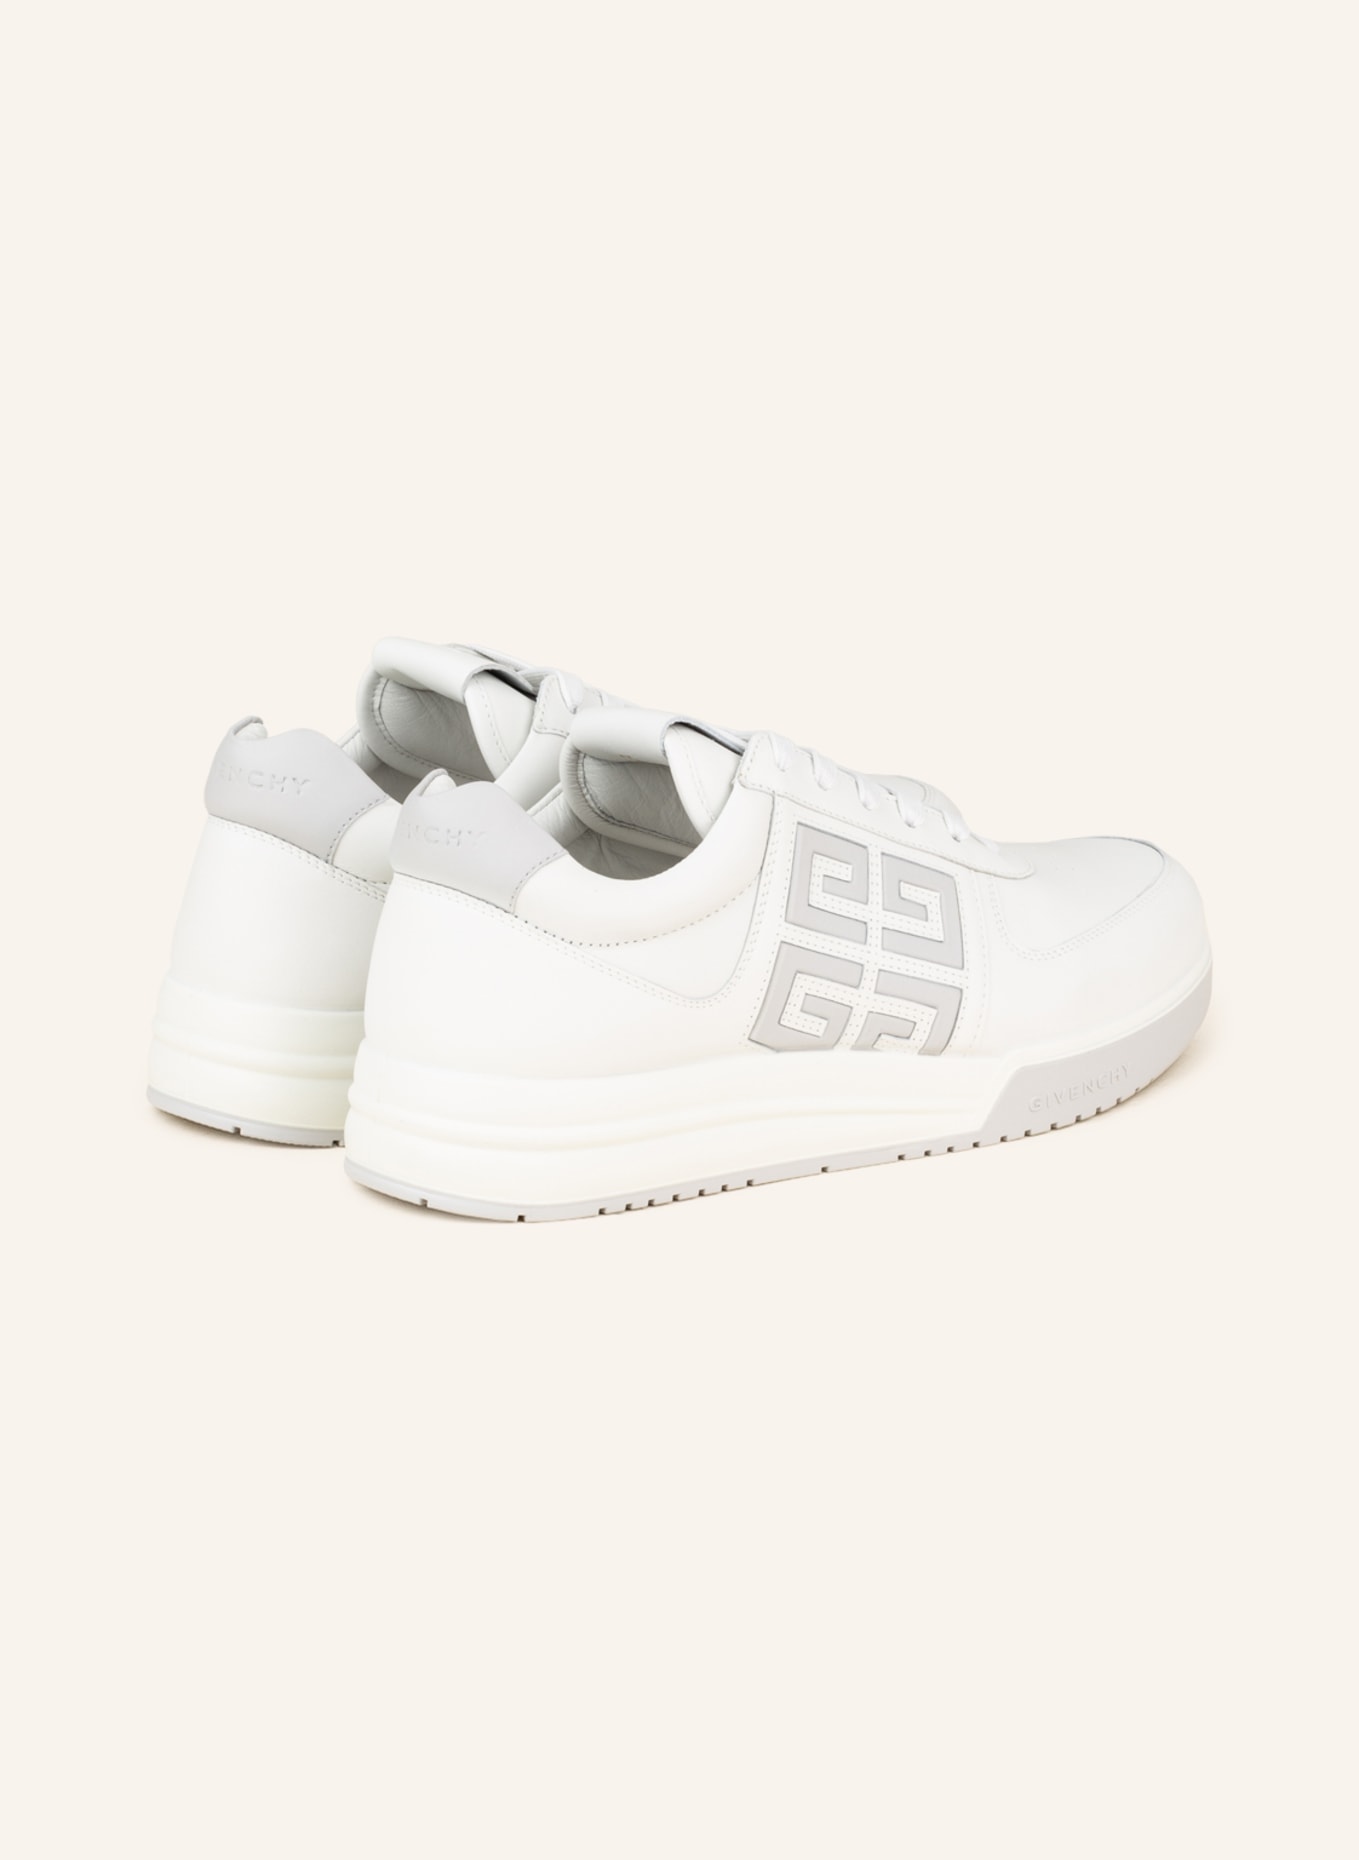 GIVENCHY Sneaker G4, Farbe: WEISS (Bild 2)